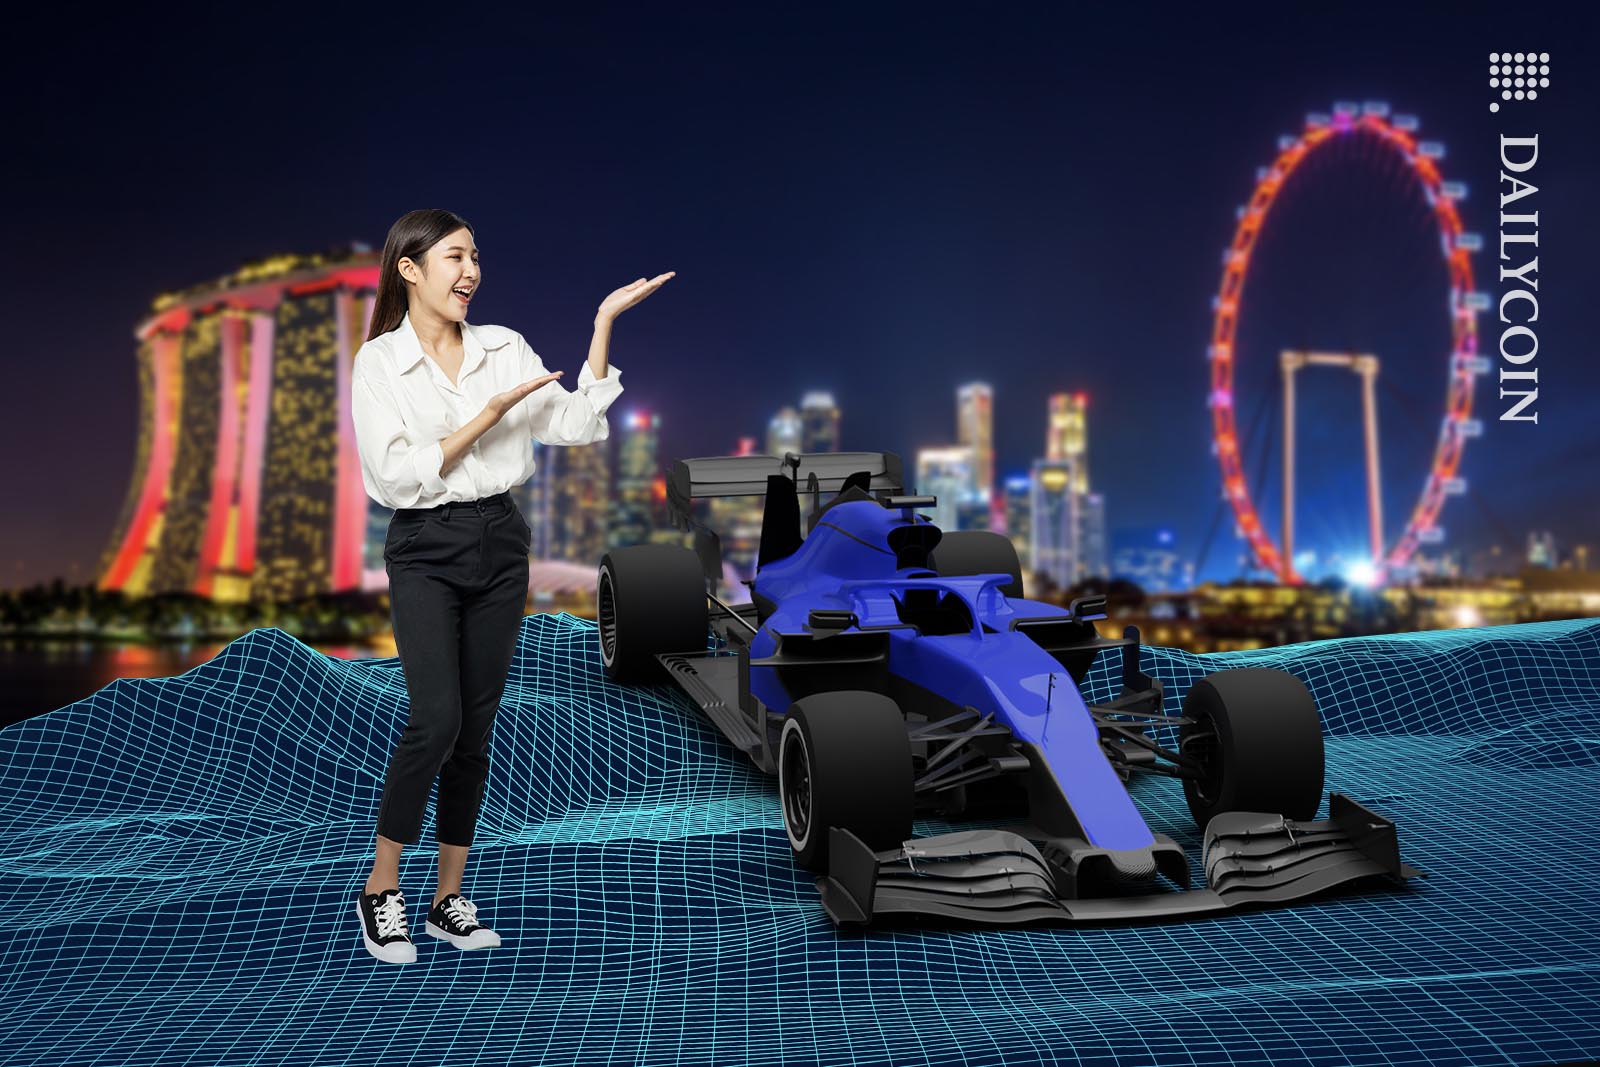 Asian girl presenting an F1 car for the Singaporian Grand Prix with zero sponsors or livery.